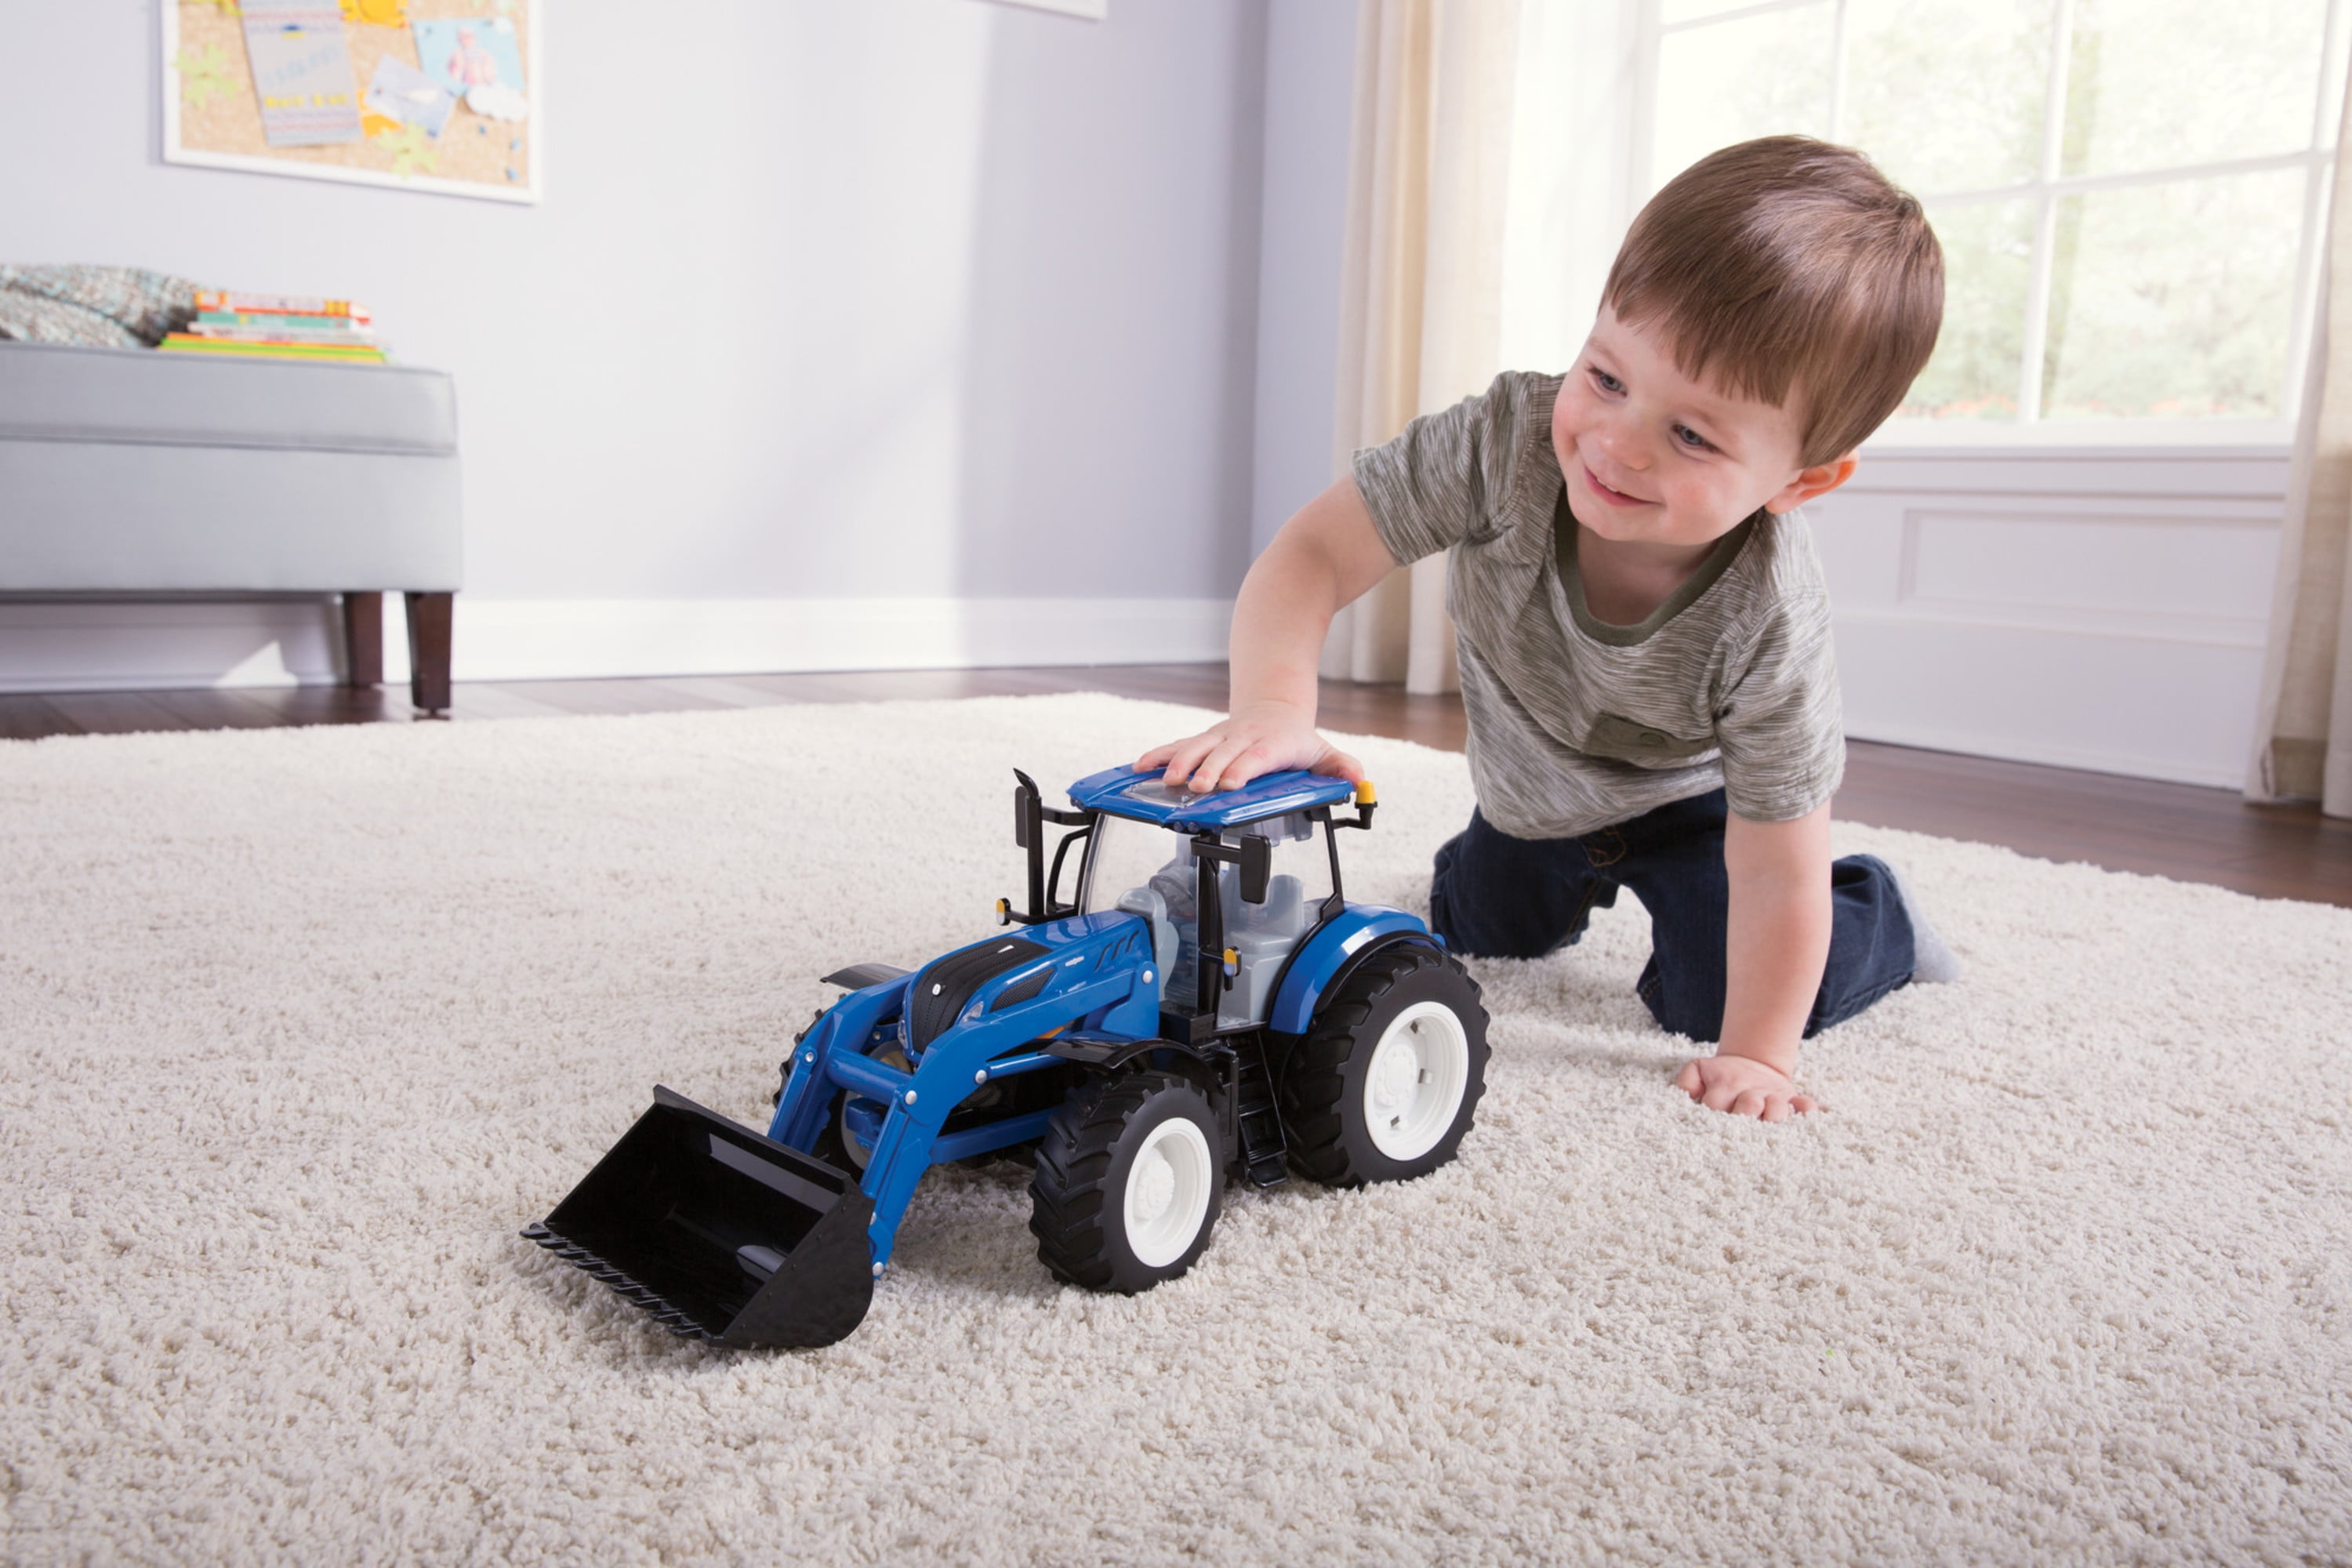 Tomy 43156a1 Holland T7.270 Tractor Toy for sale online 